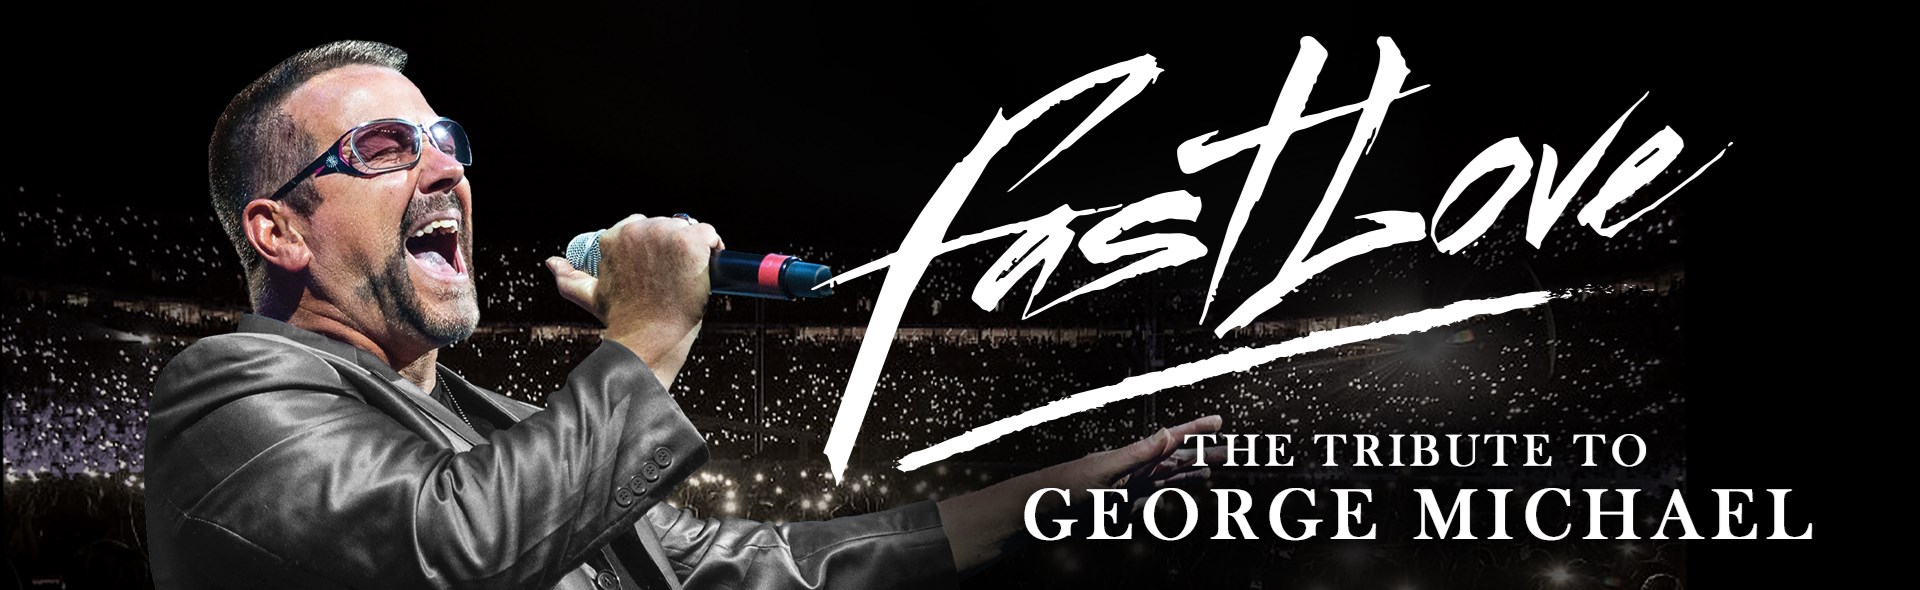 Fastlove - A Tribute To George Michael 